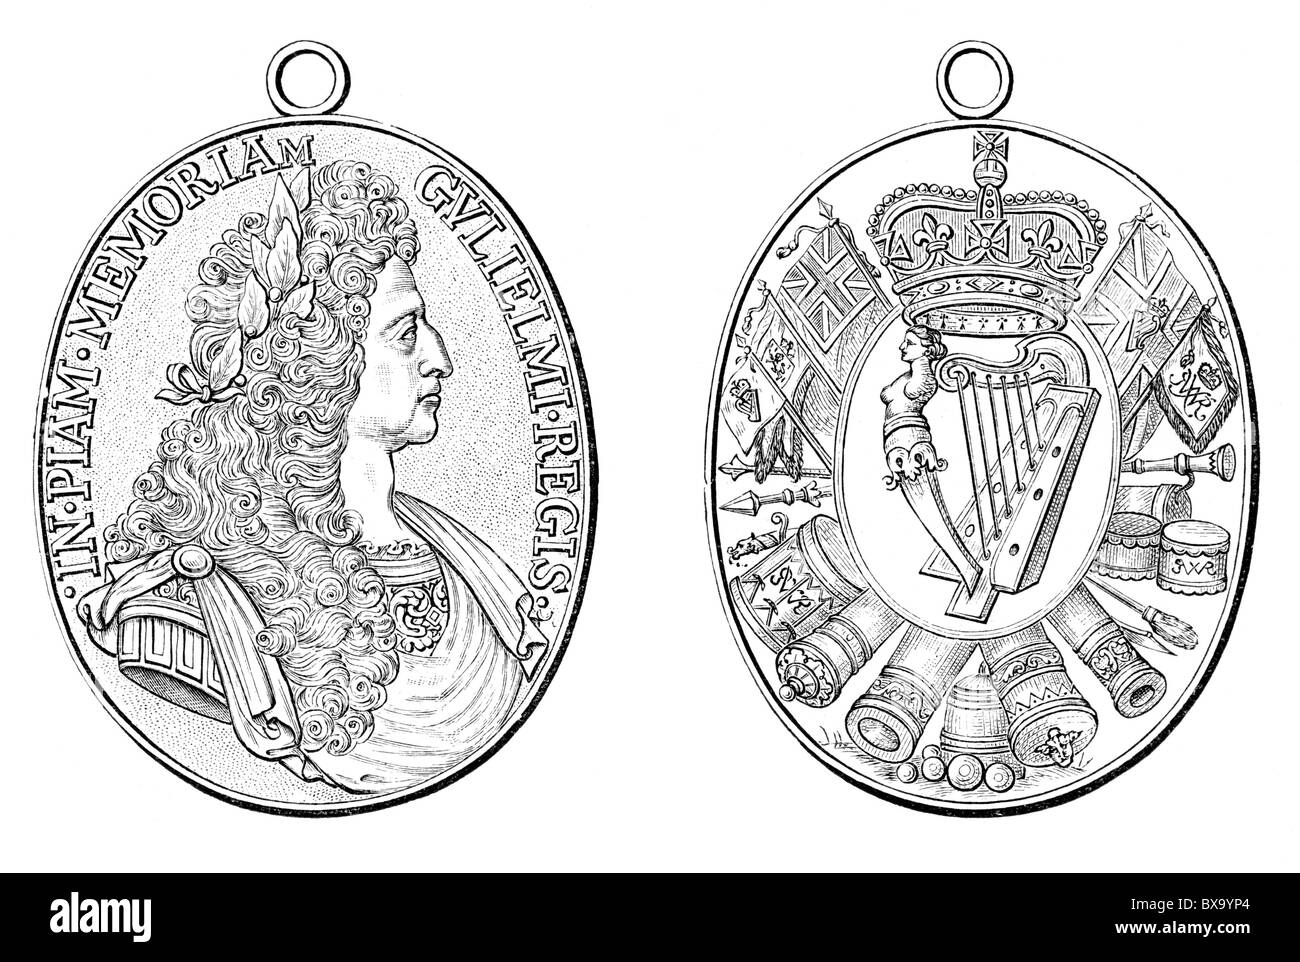 Gold medal issued as a memorial to King William III of England; Black and White Illustration; Stock Photo